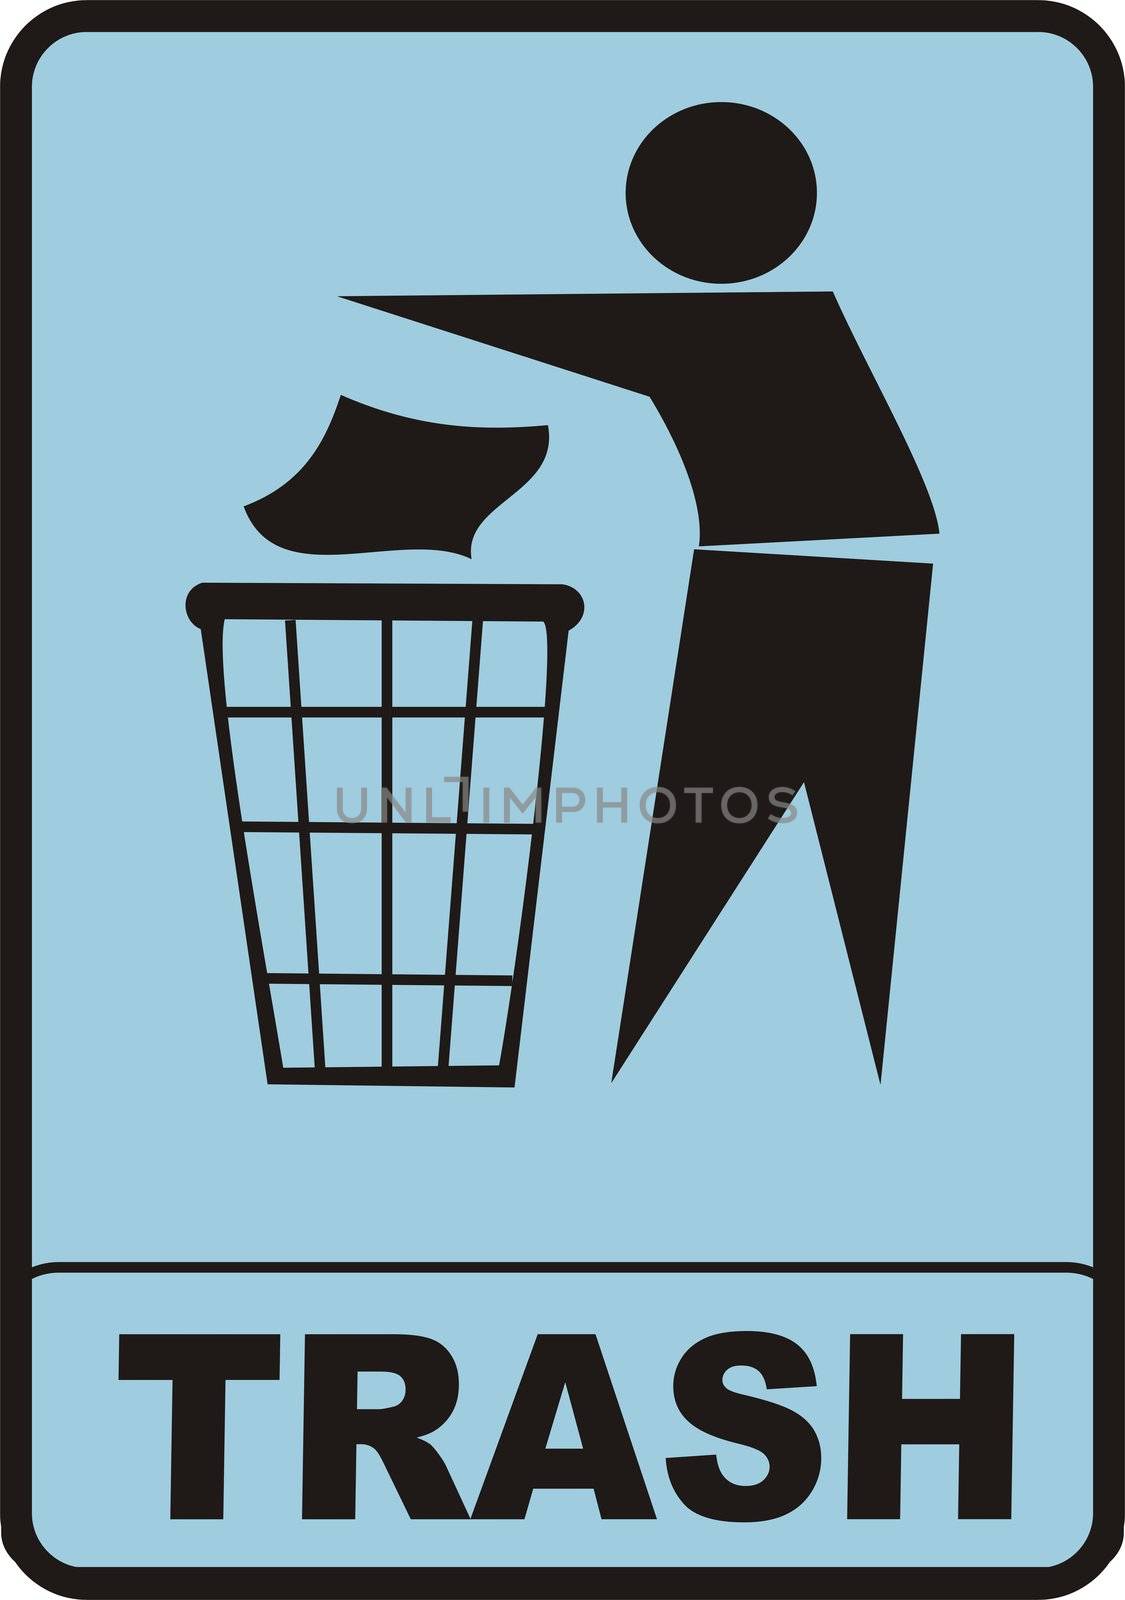 figure of person throwing garbage into a trash can vector